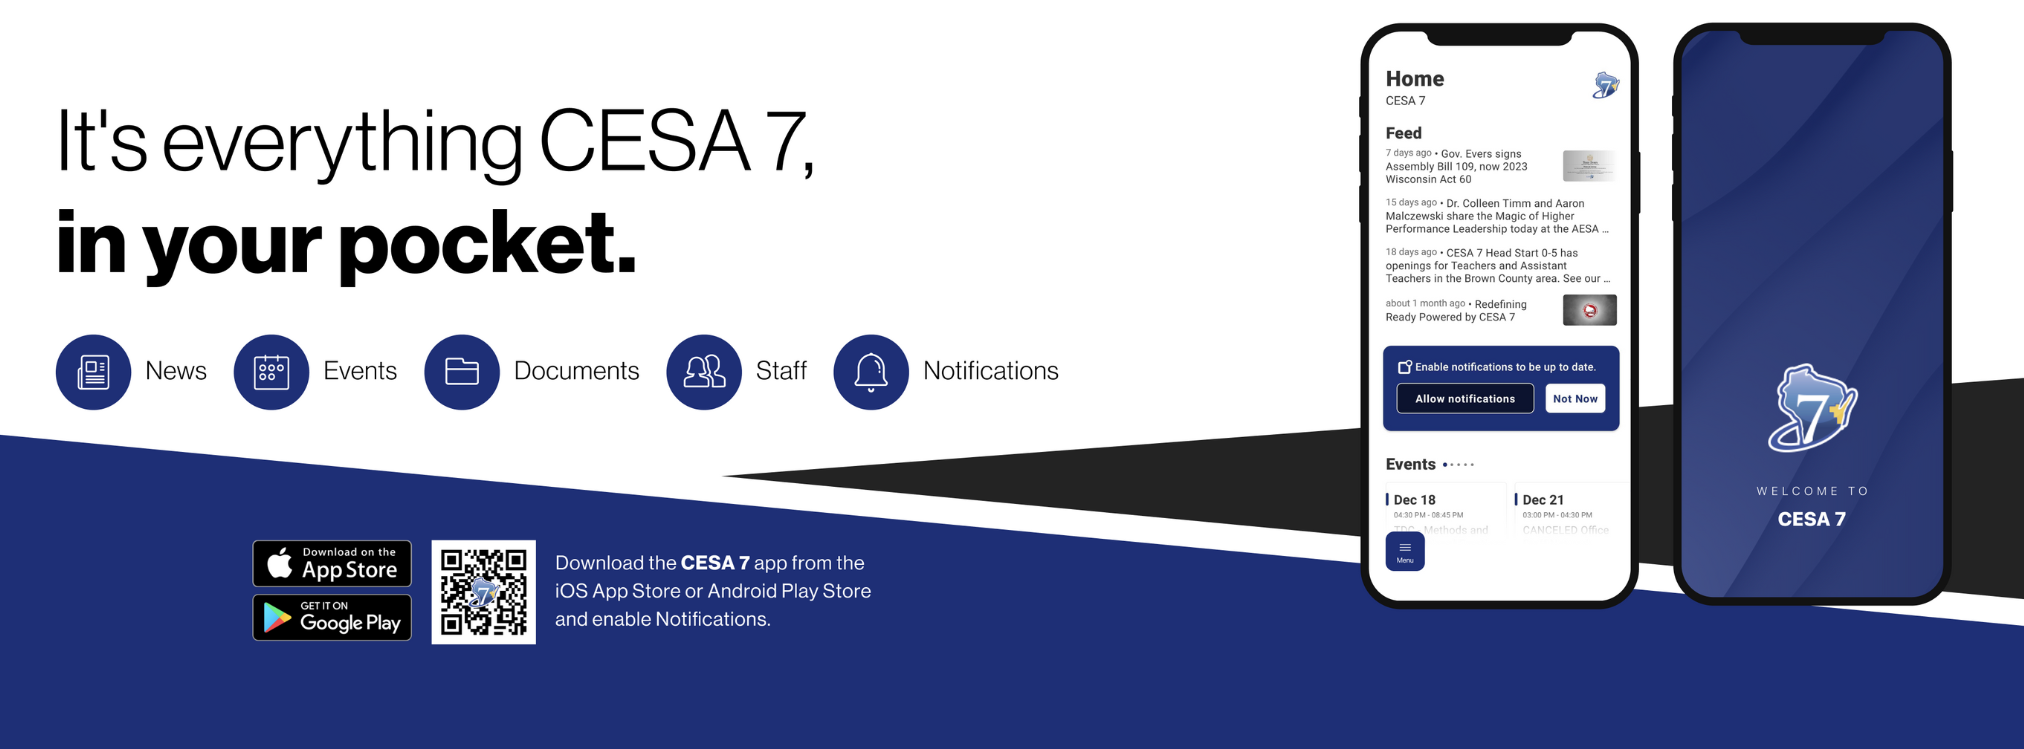 Everything CESA 7 In Your Pocket.